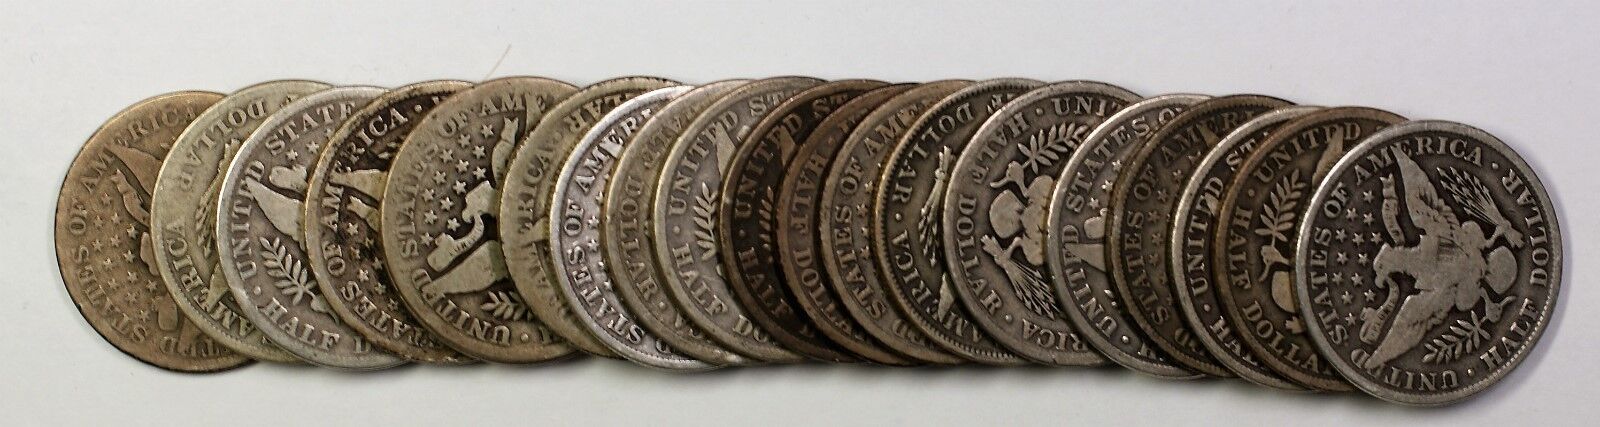 1914-S Barber Half Dollar 50c Roll 20 Circulated 90% Old Silver Coins Lot